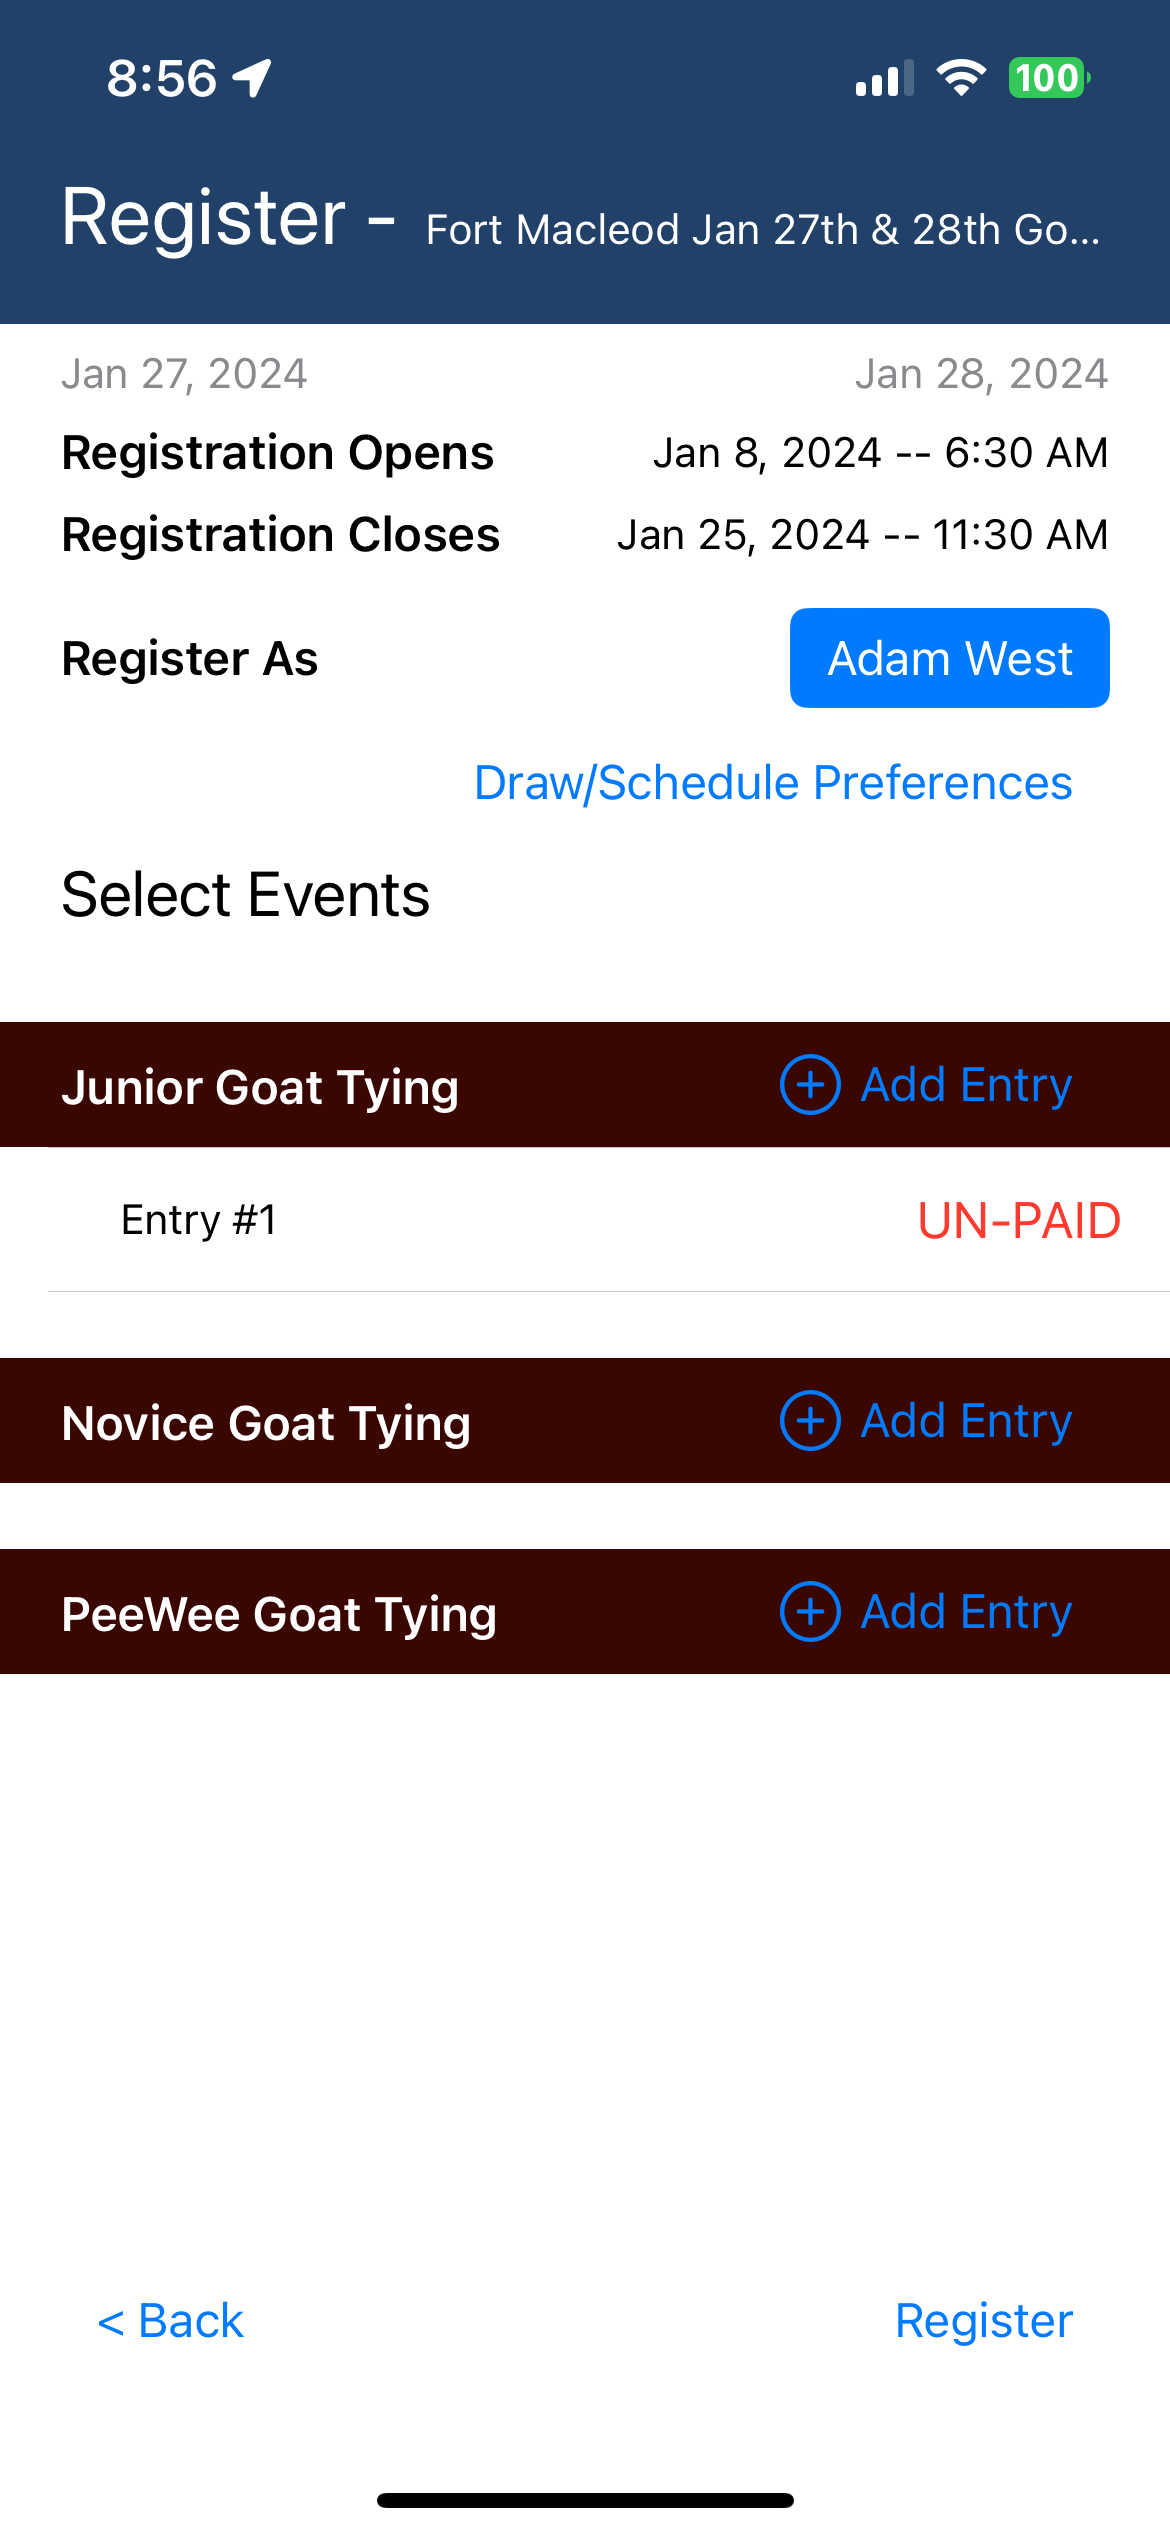 goat-tying-competition-online-registration